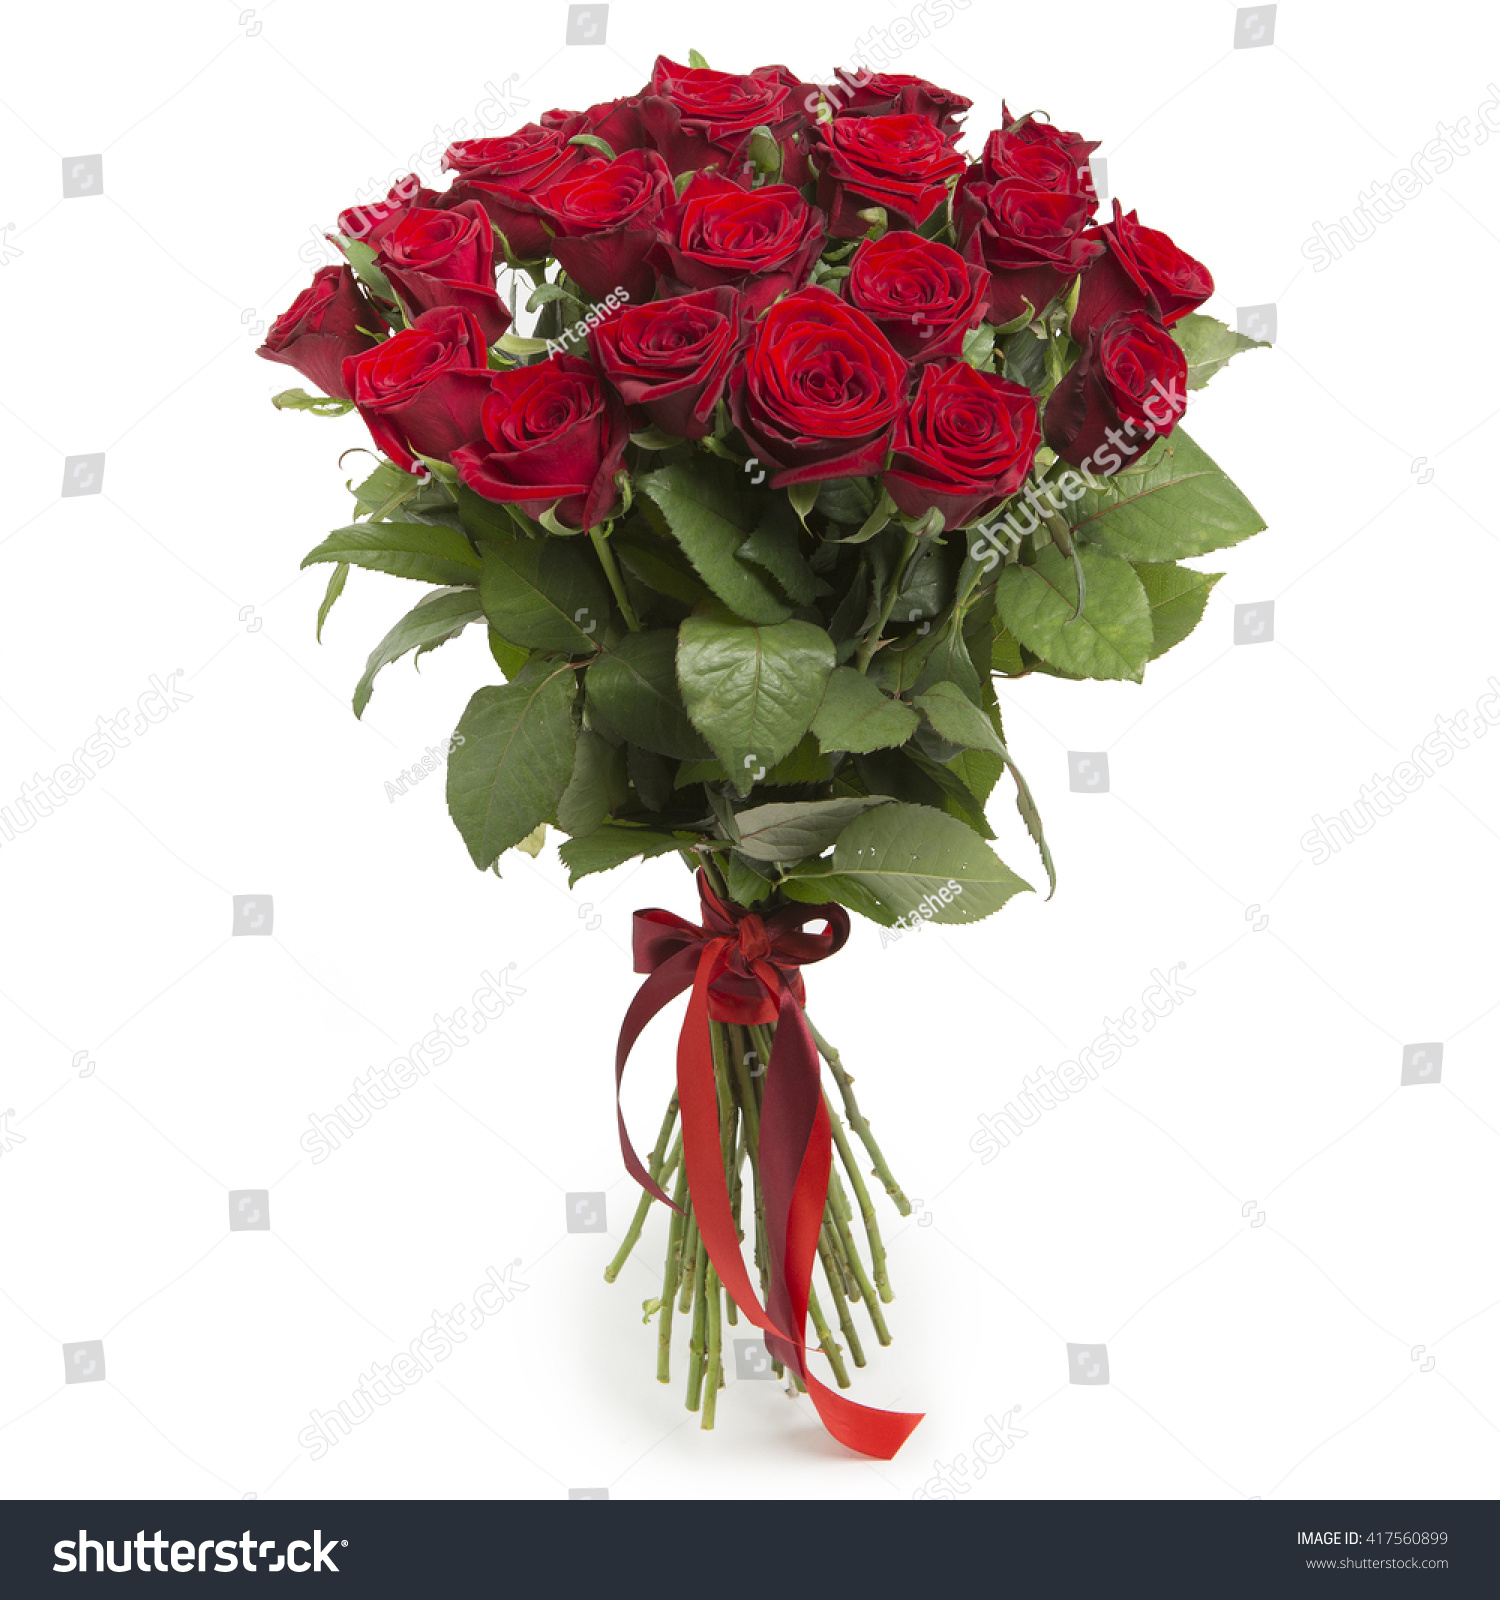 Bouquet of red roses on white background #417560899